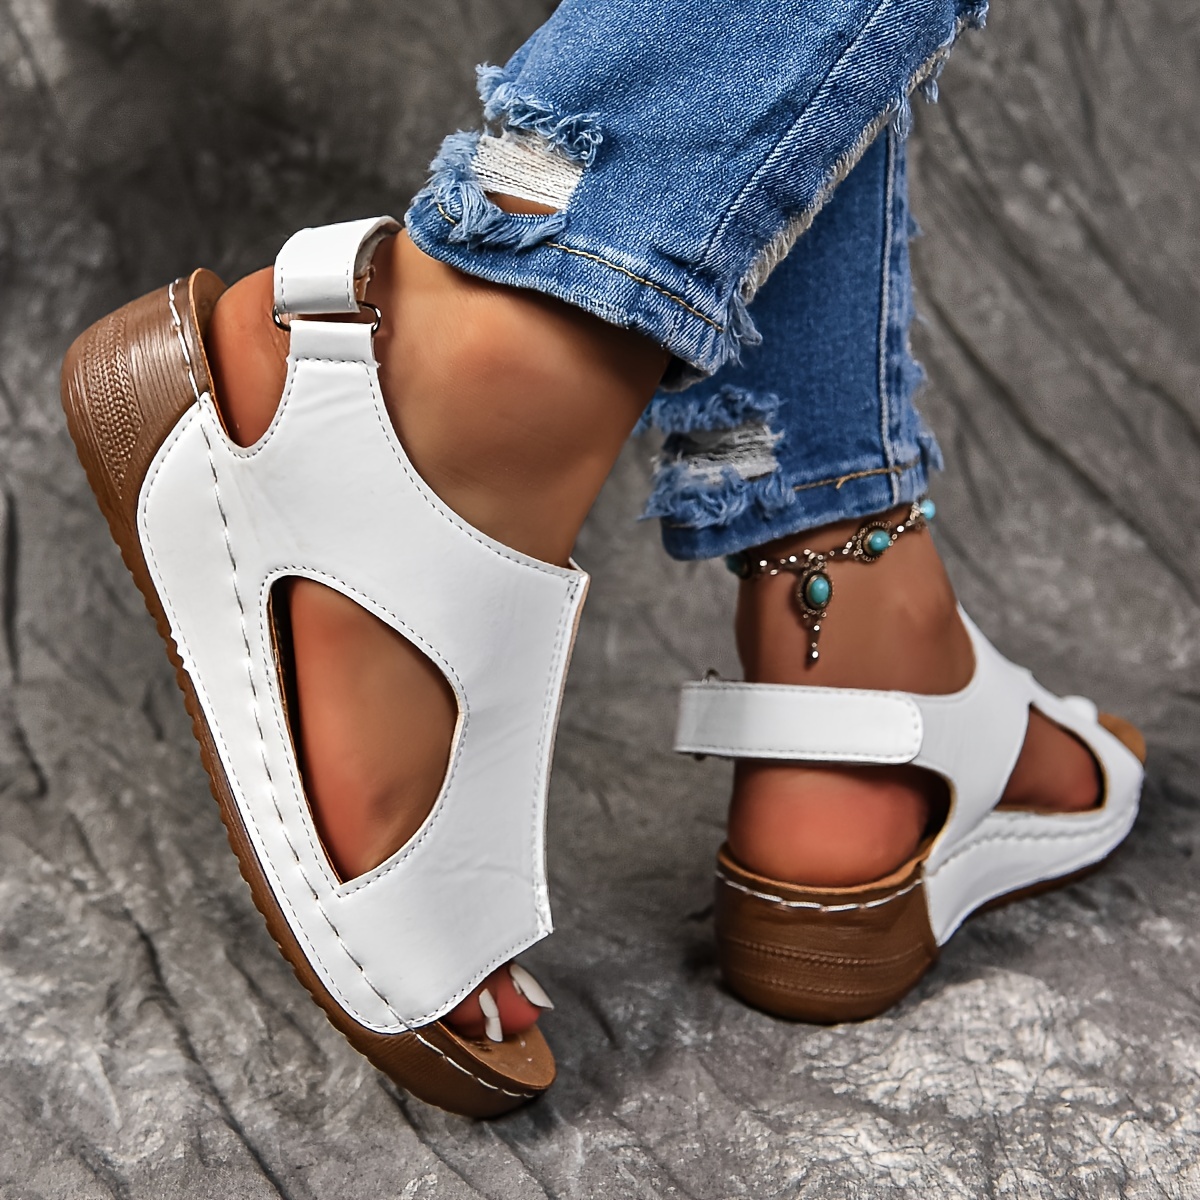 women s solid color wedge heeled sandals casual open toe details 6